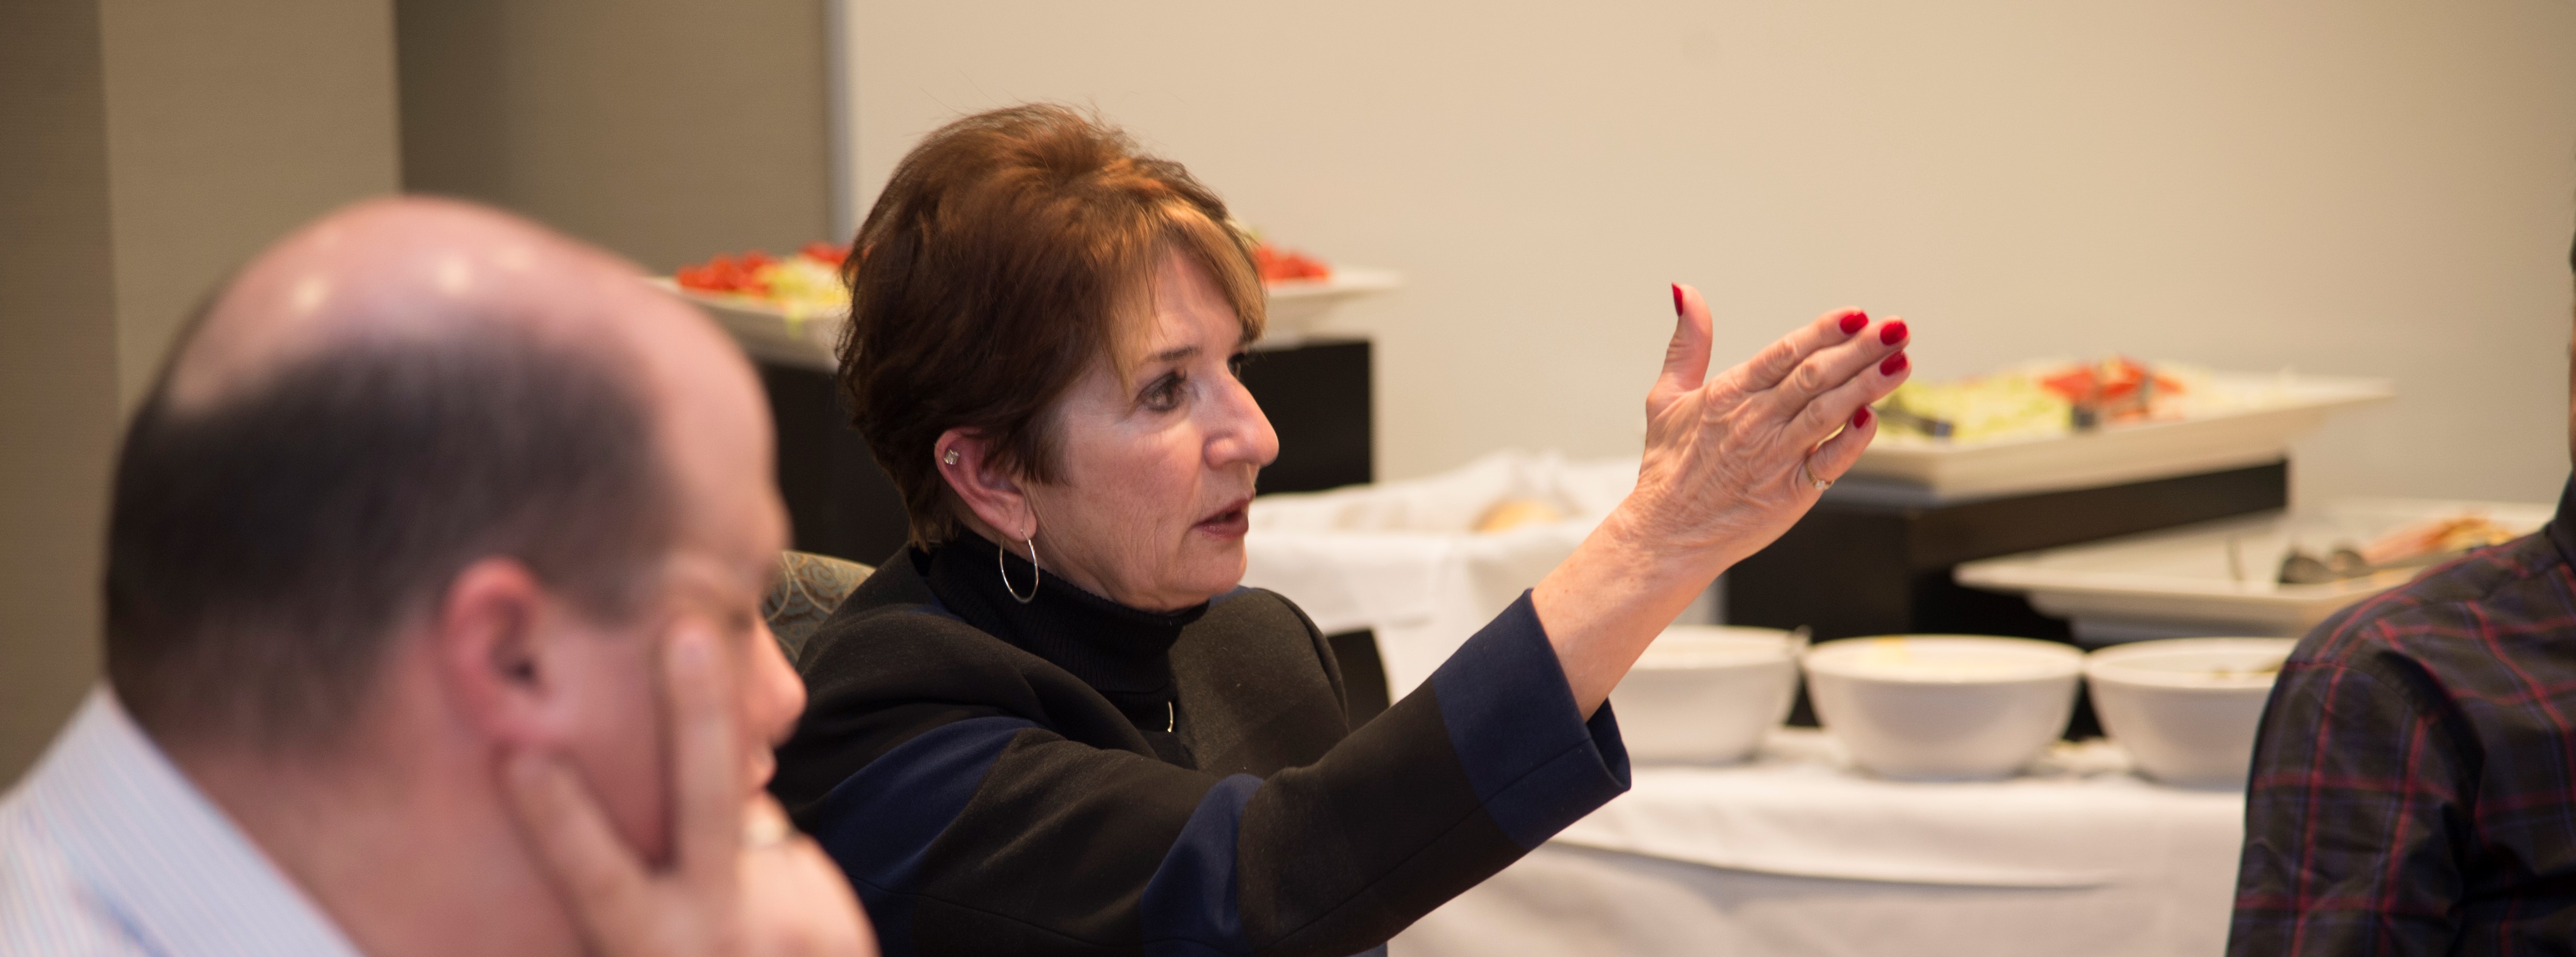 A woman gesturing to something during a meeting